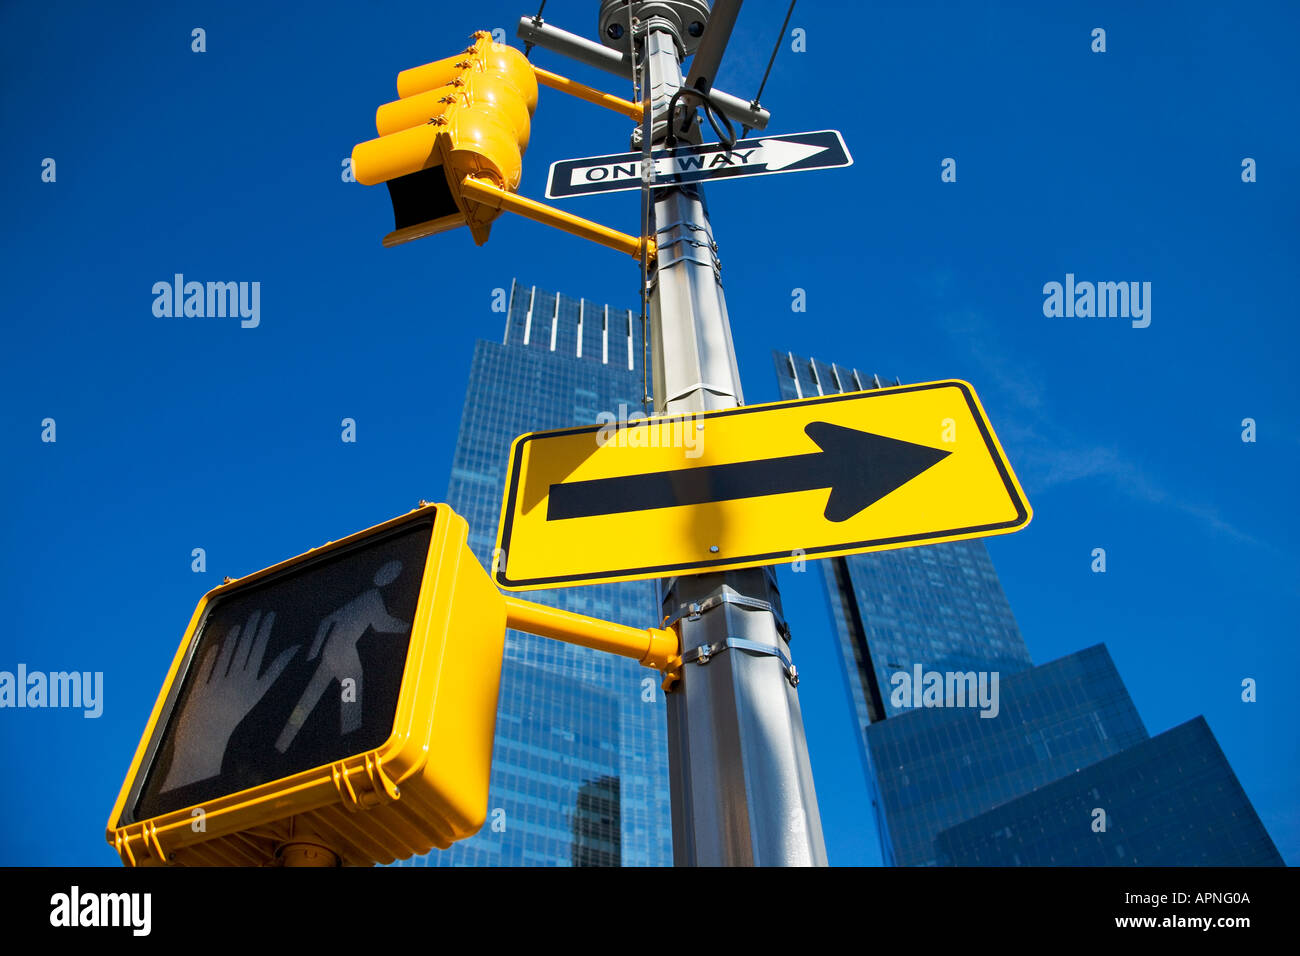 Pedestrian crossing in a city Stock Photo